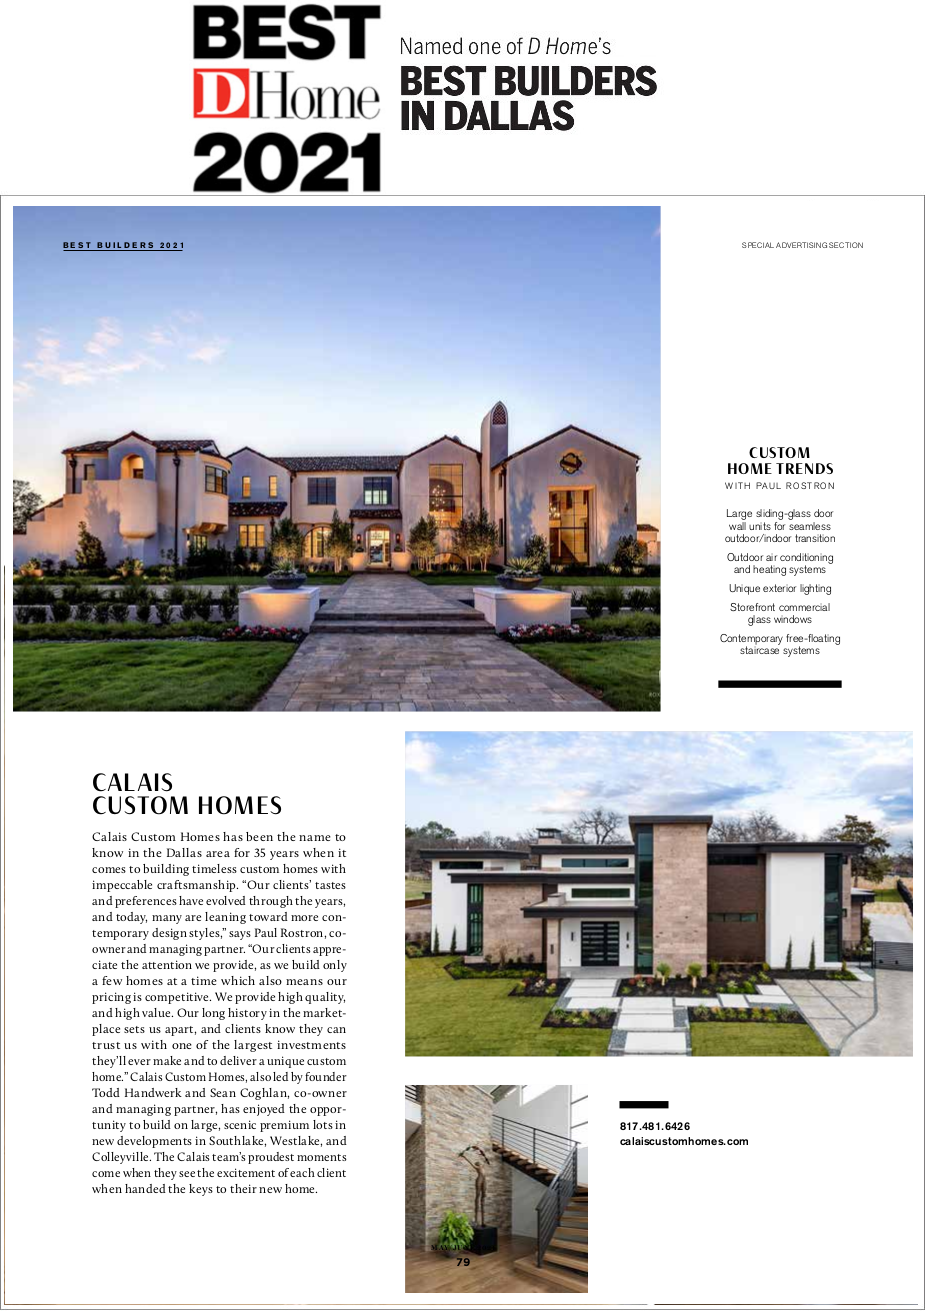 2021 DHome Best Builder Award Article